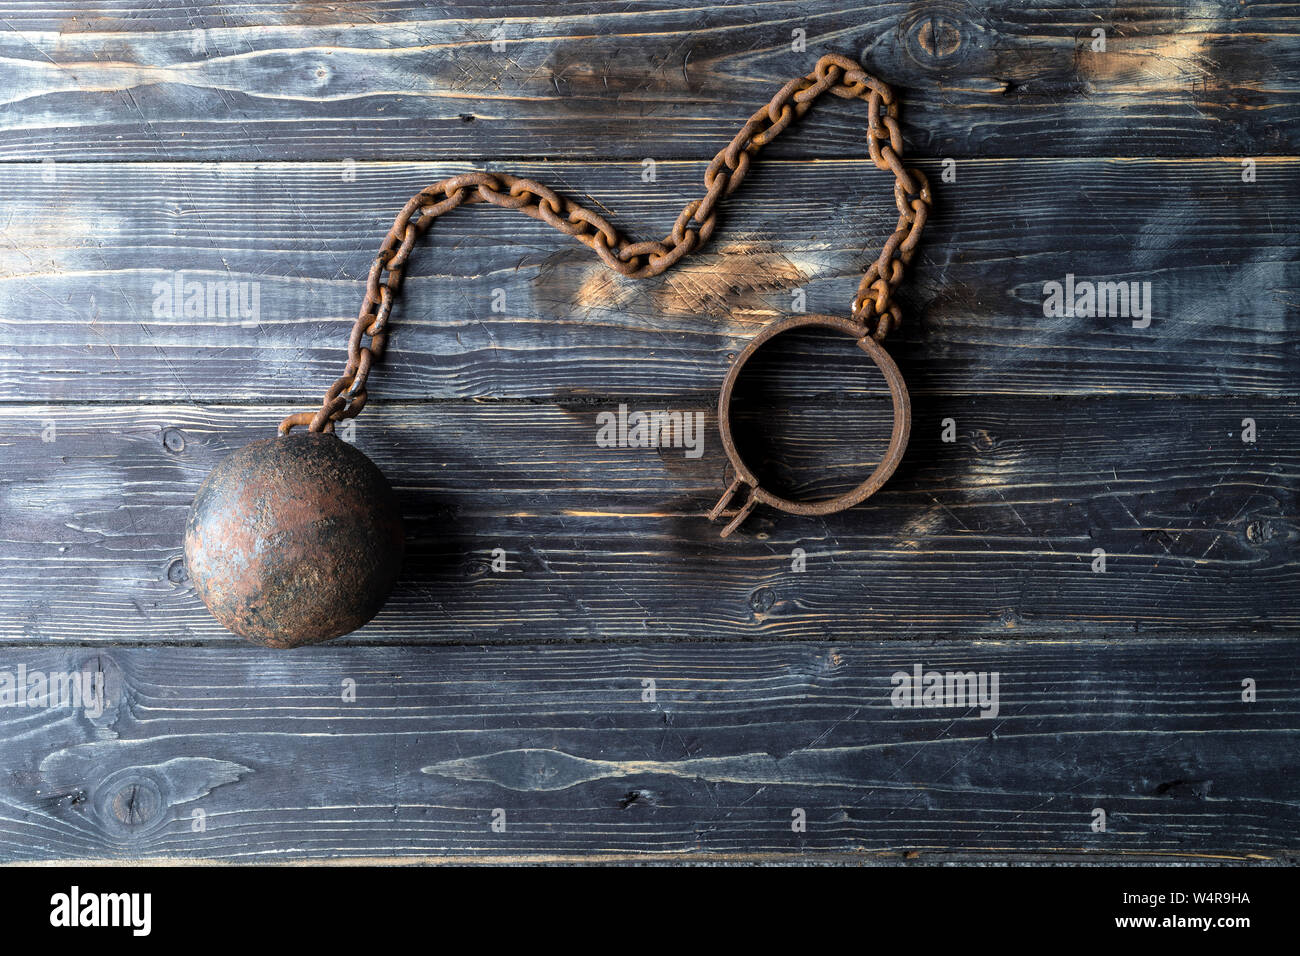 Metal ball with chain on the leg. Prison equipment. Stock Photo